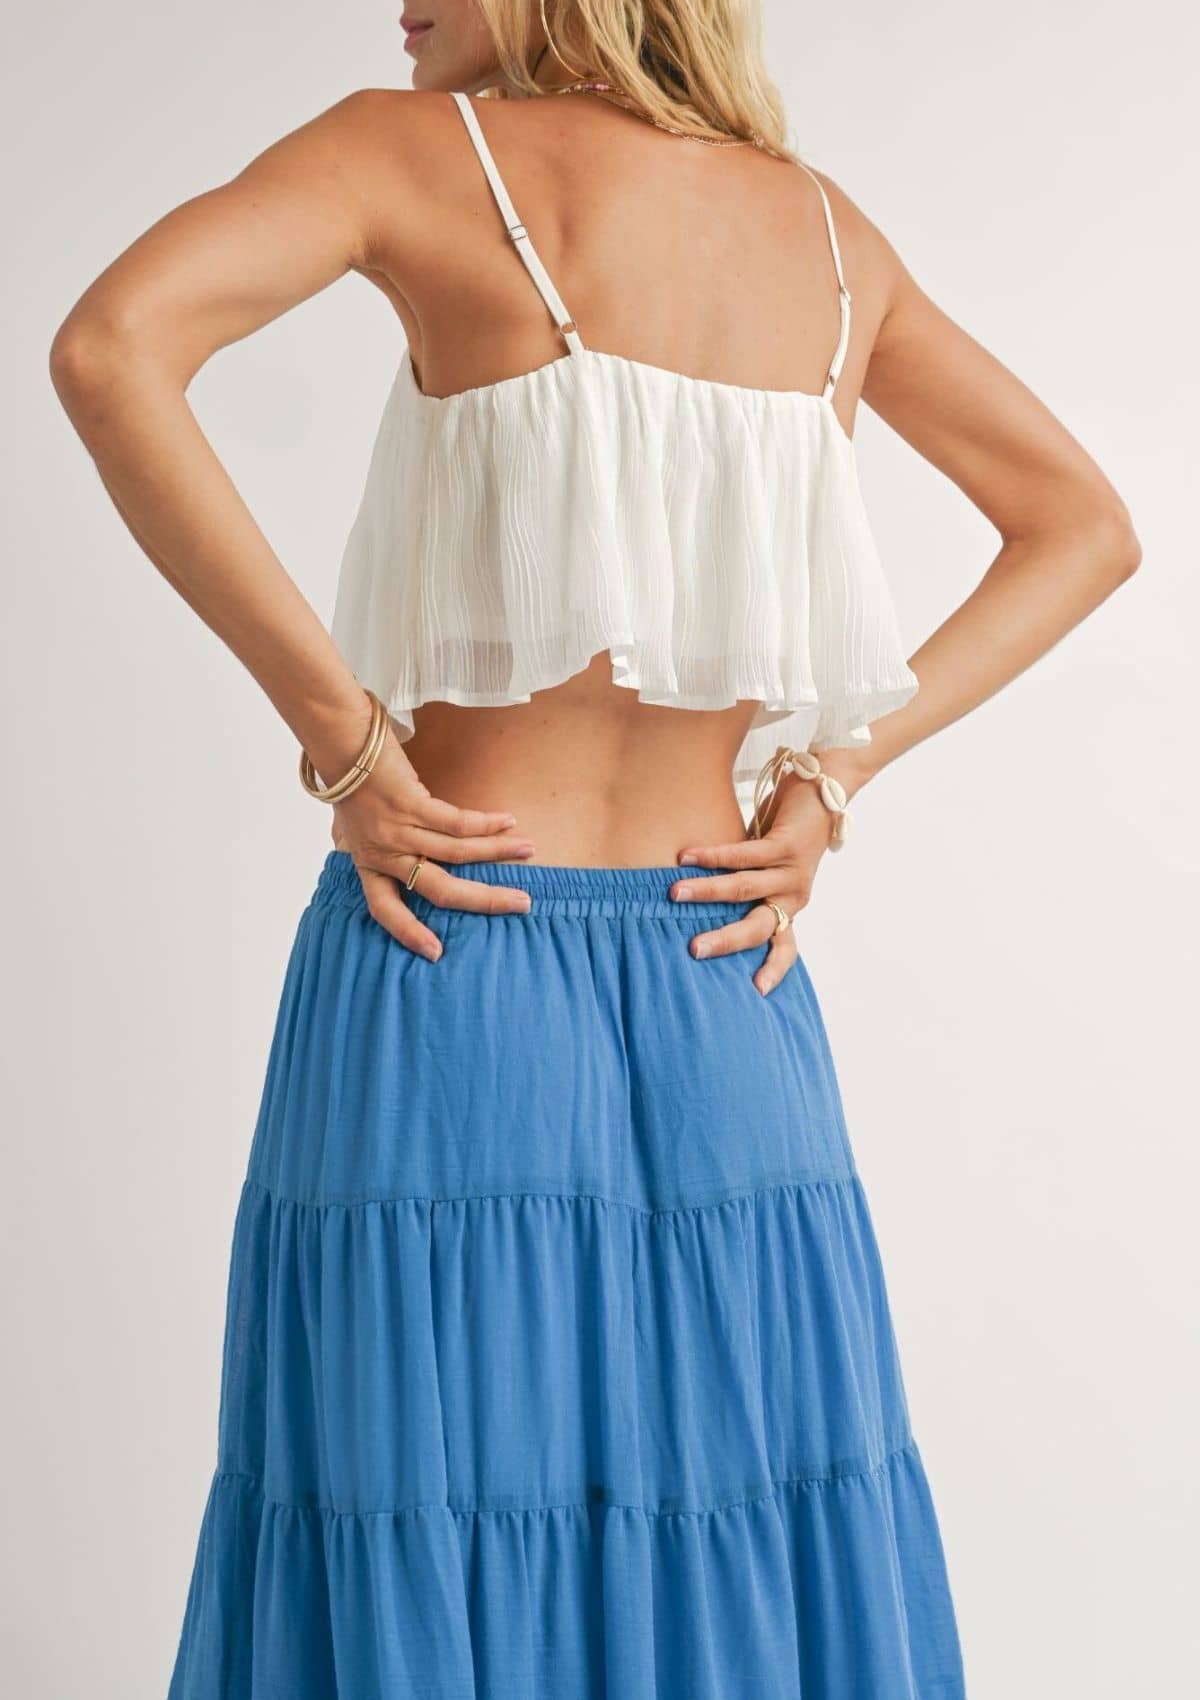 Adjustable spaghetti straps. Paired with blue skirt.